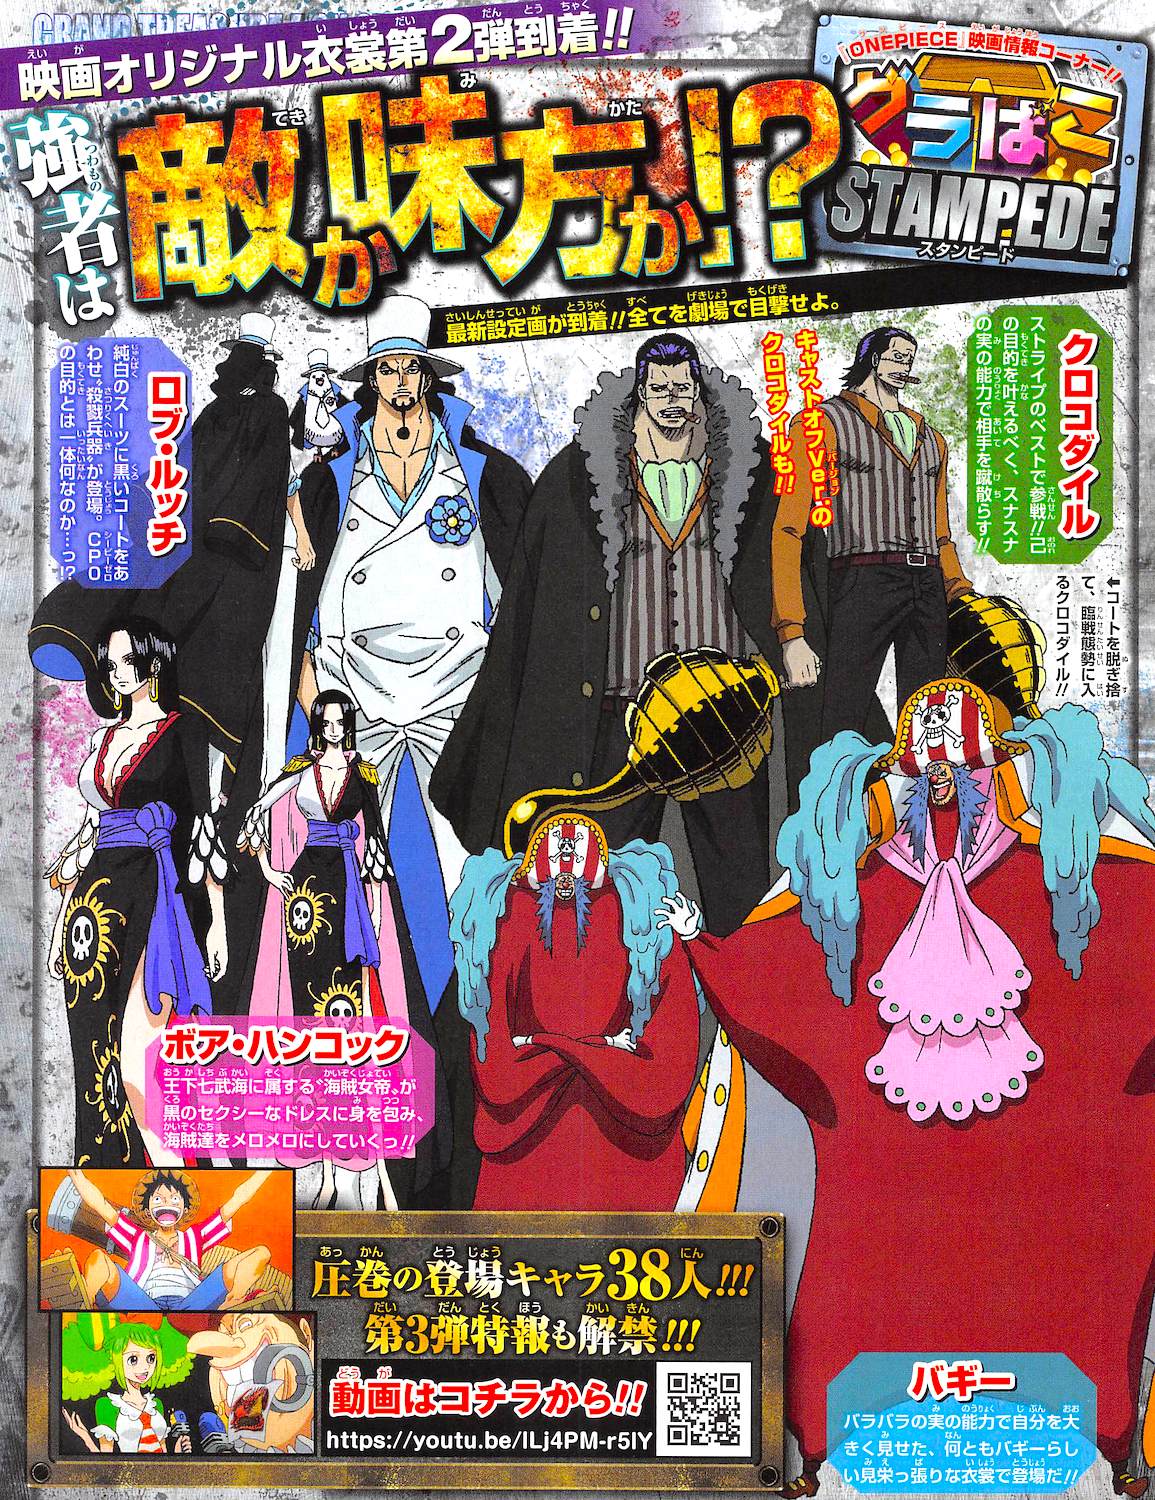 New One Piece Movie Stampede August 19 Page 12